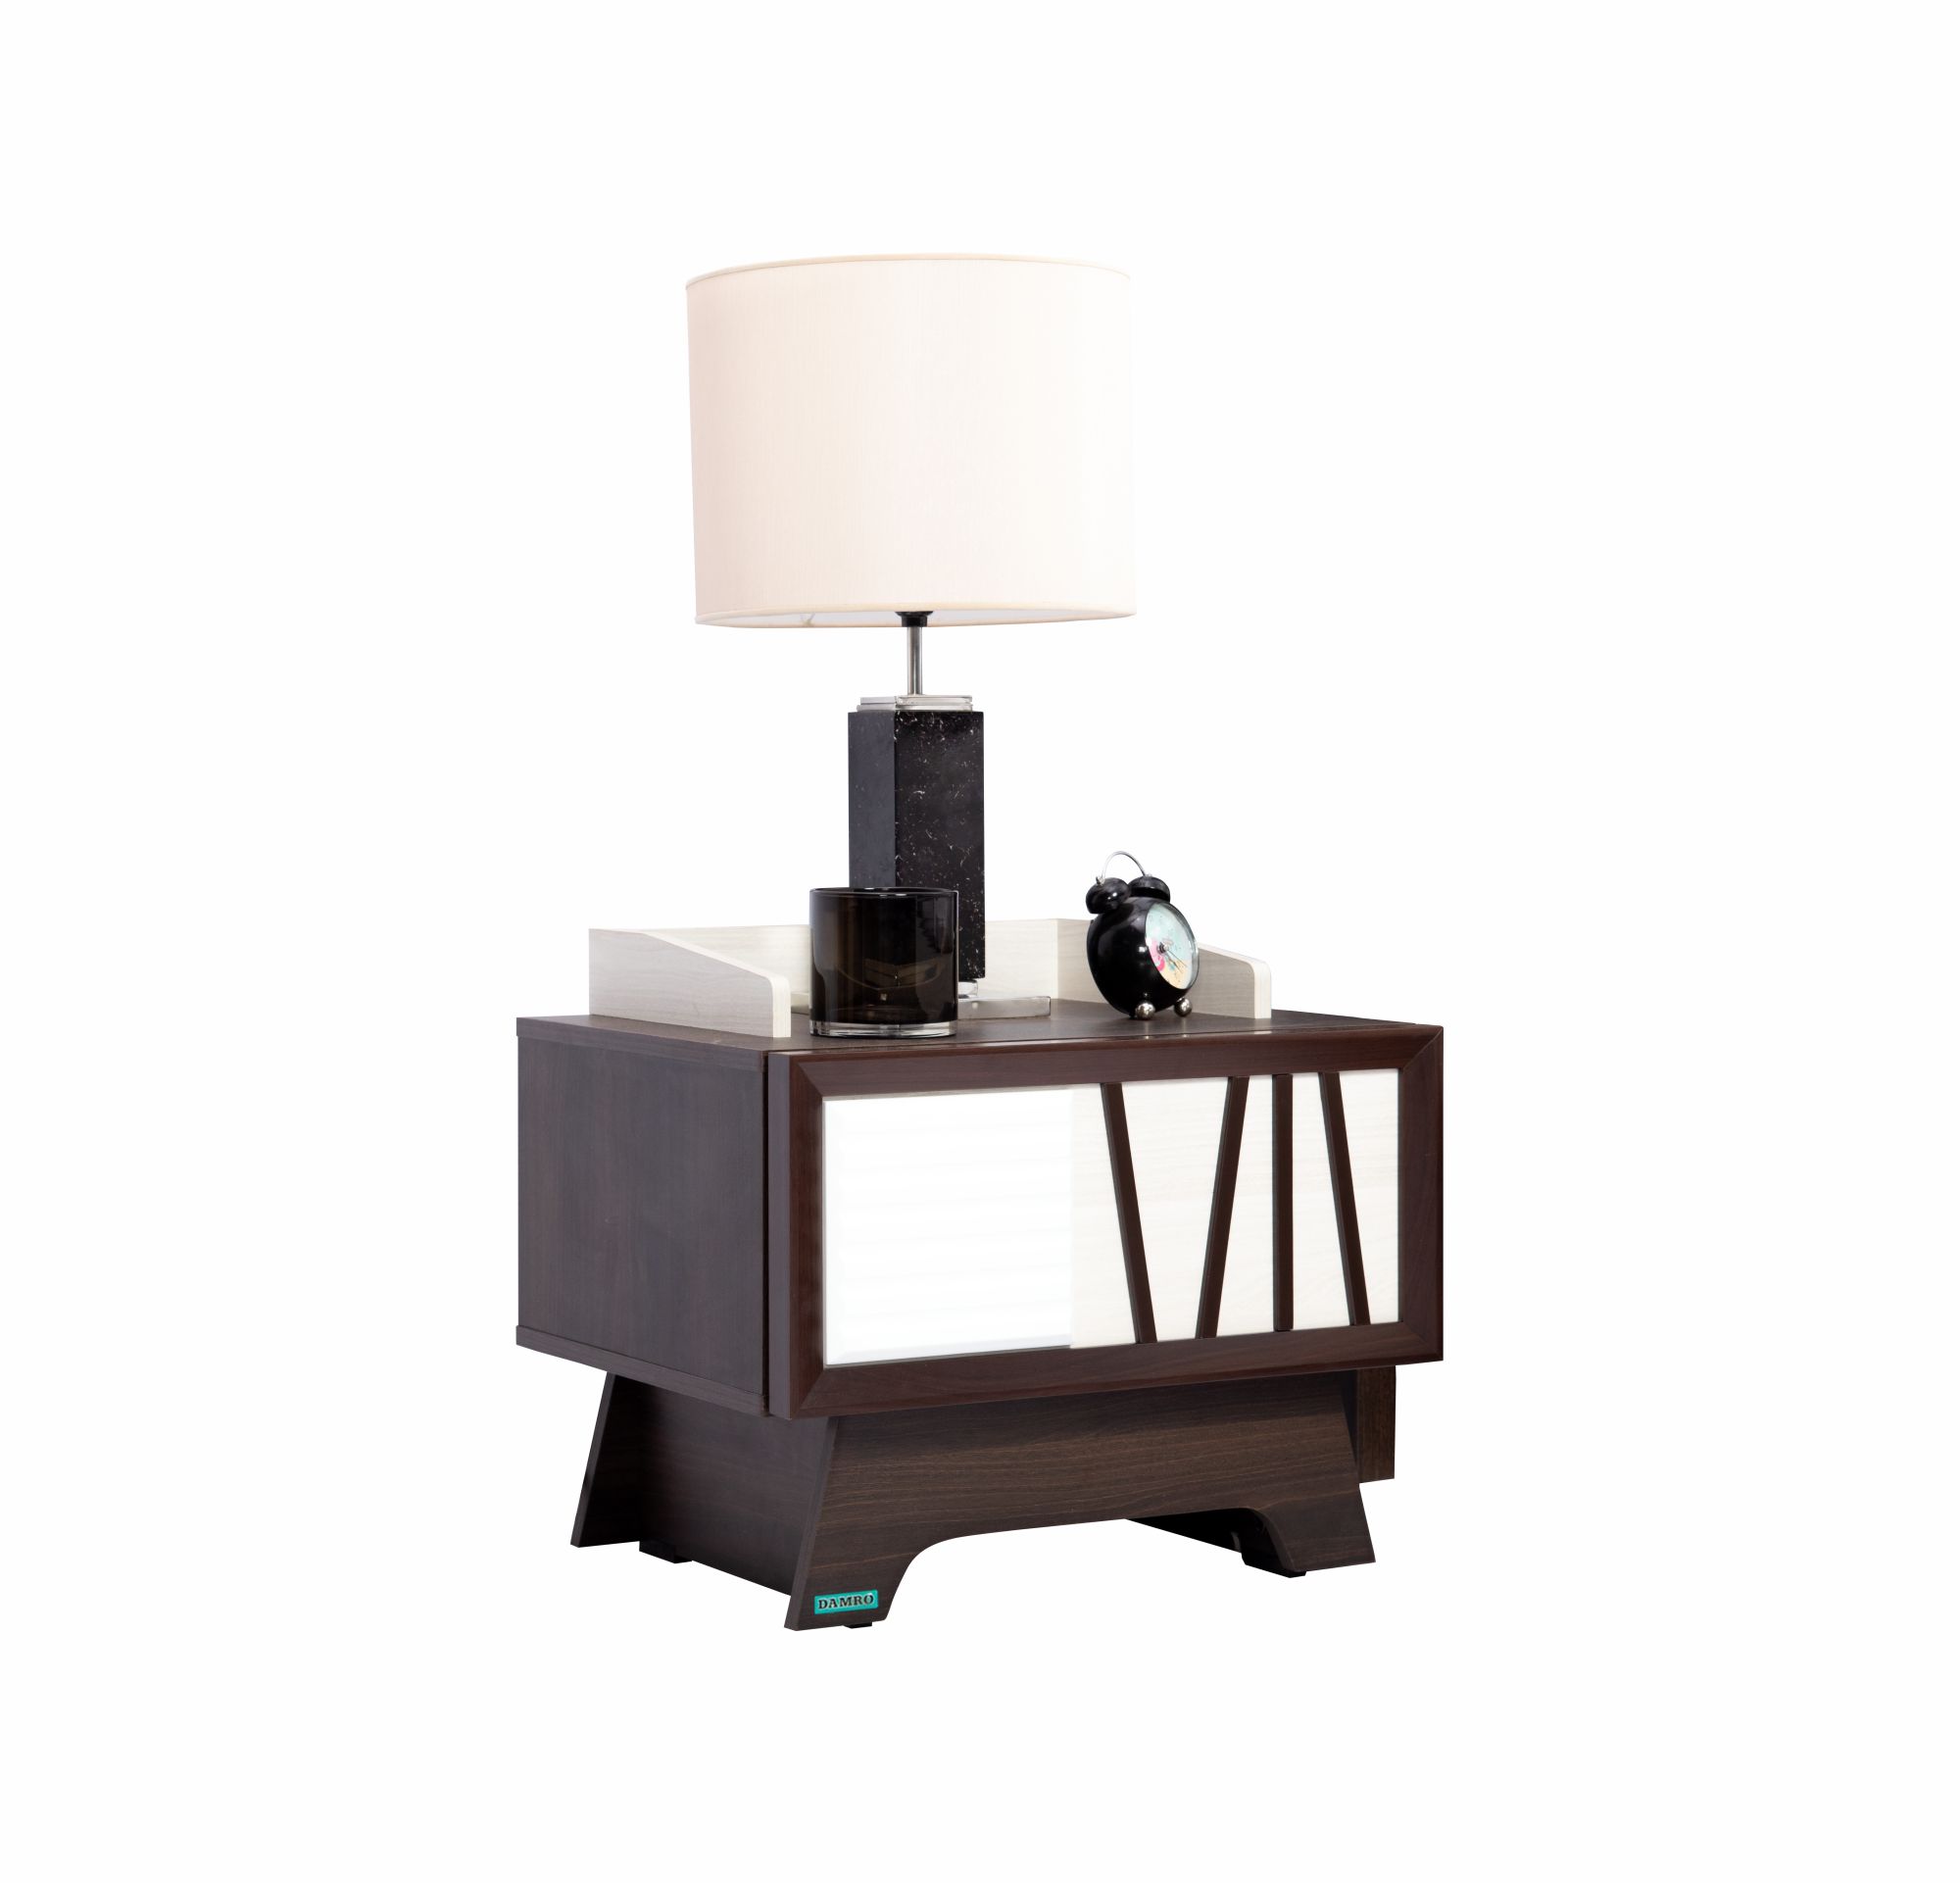 KCAD001-Bed Side Table Andriana-M42/M41